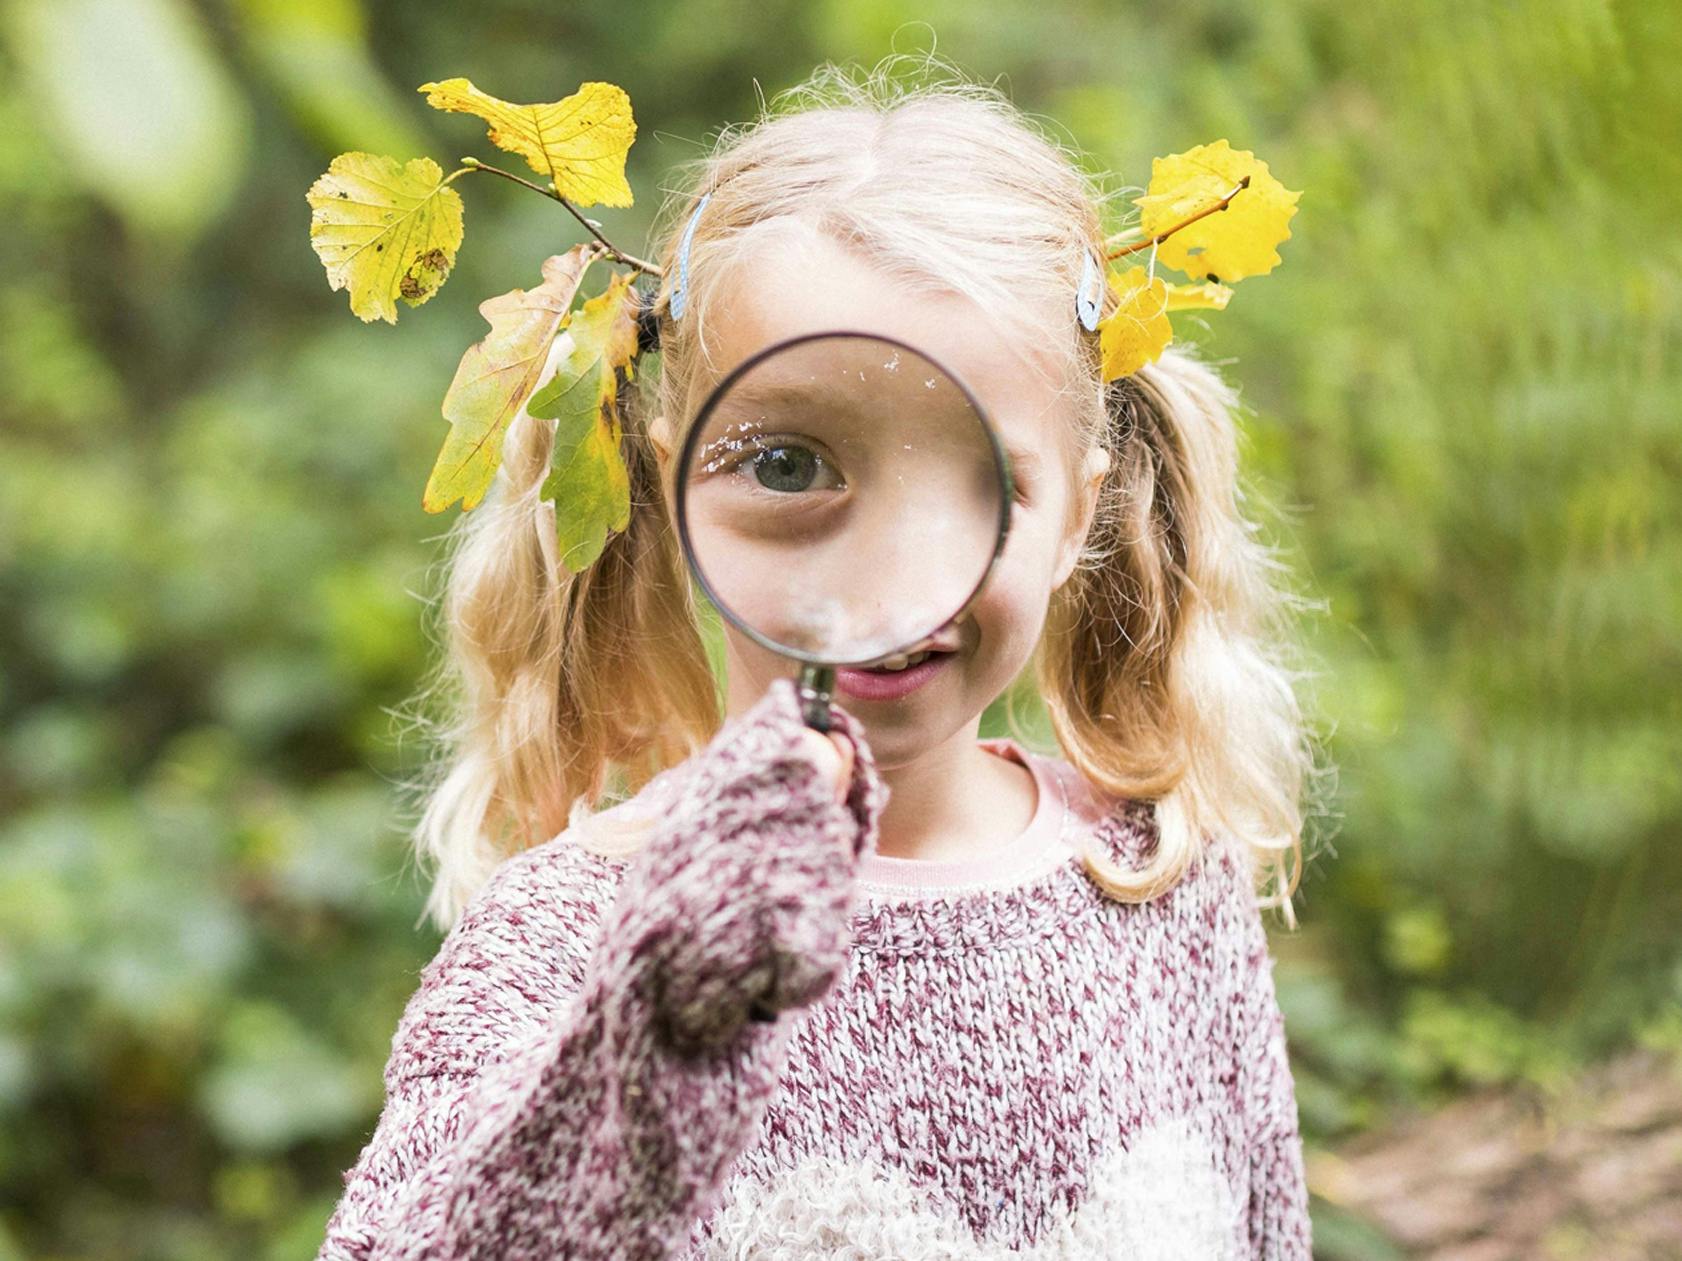 Photograph of girl with magnifying glass up close to her face